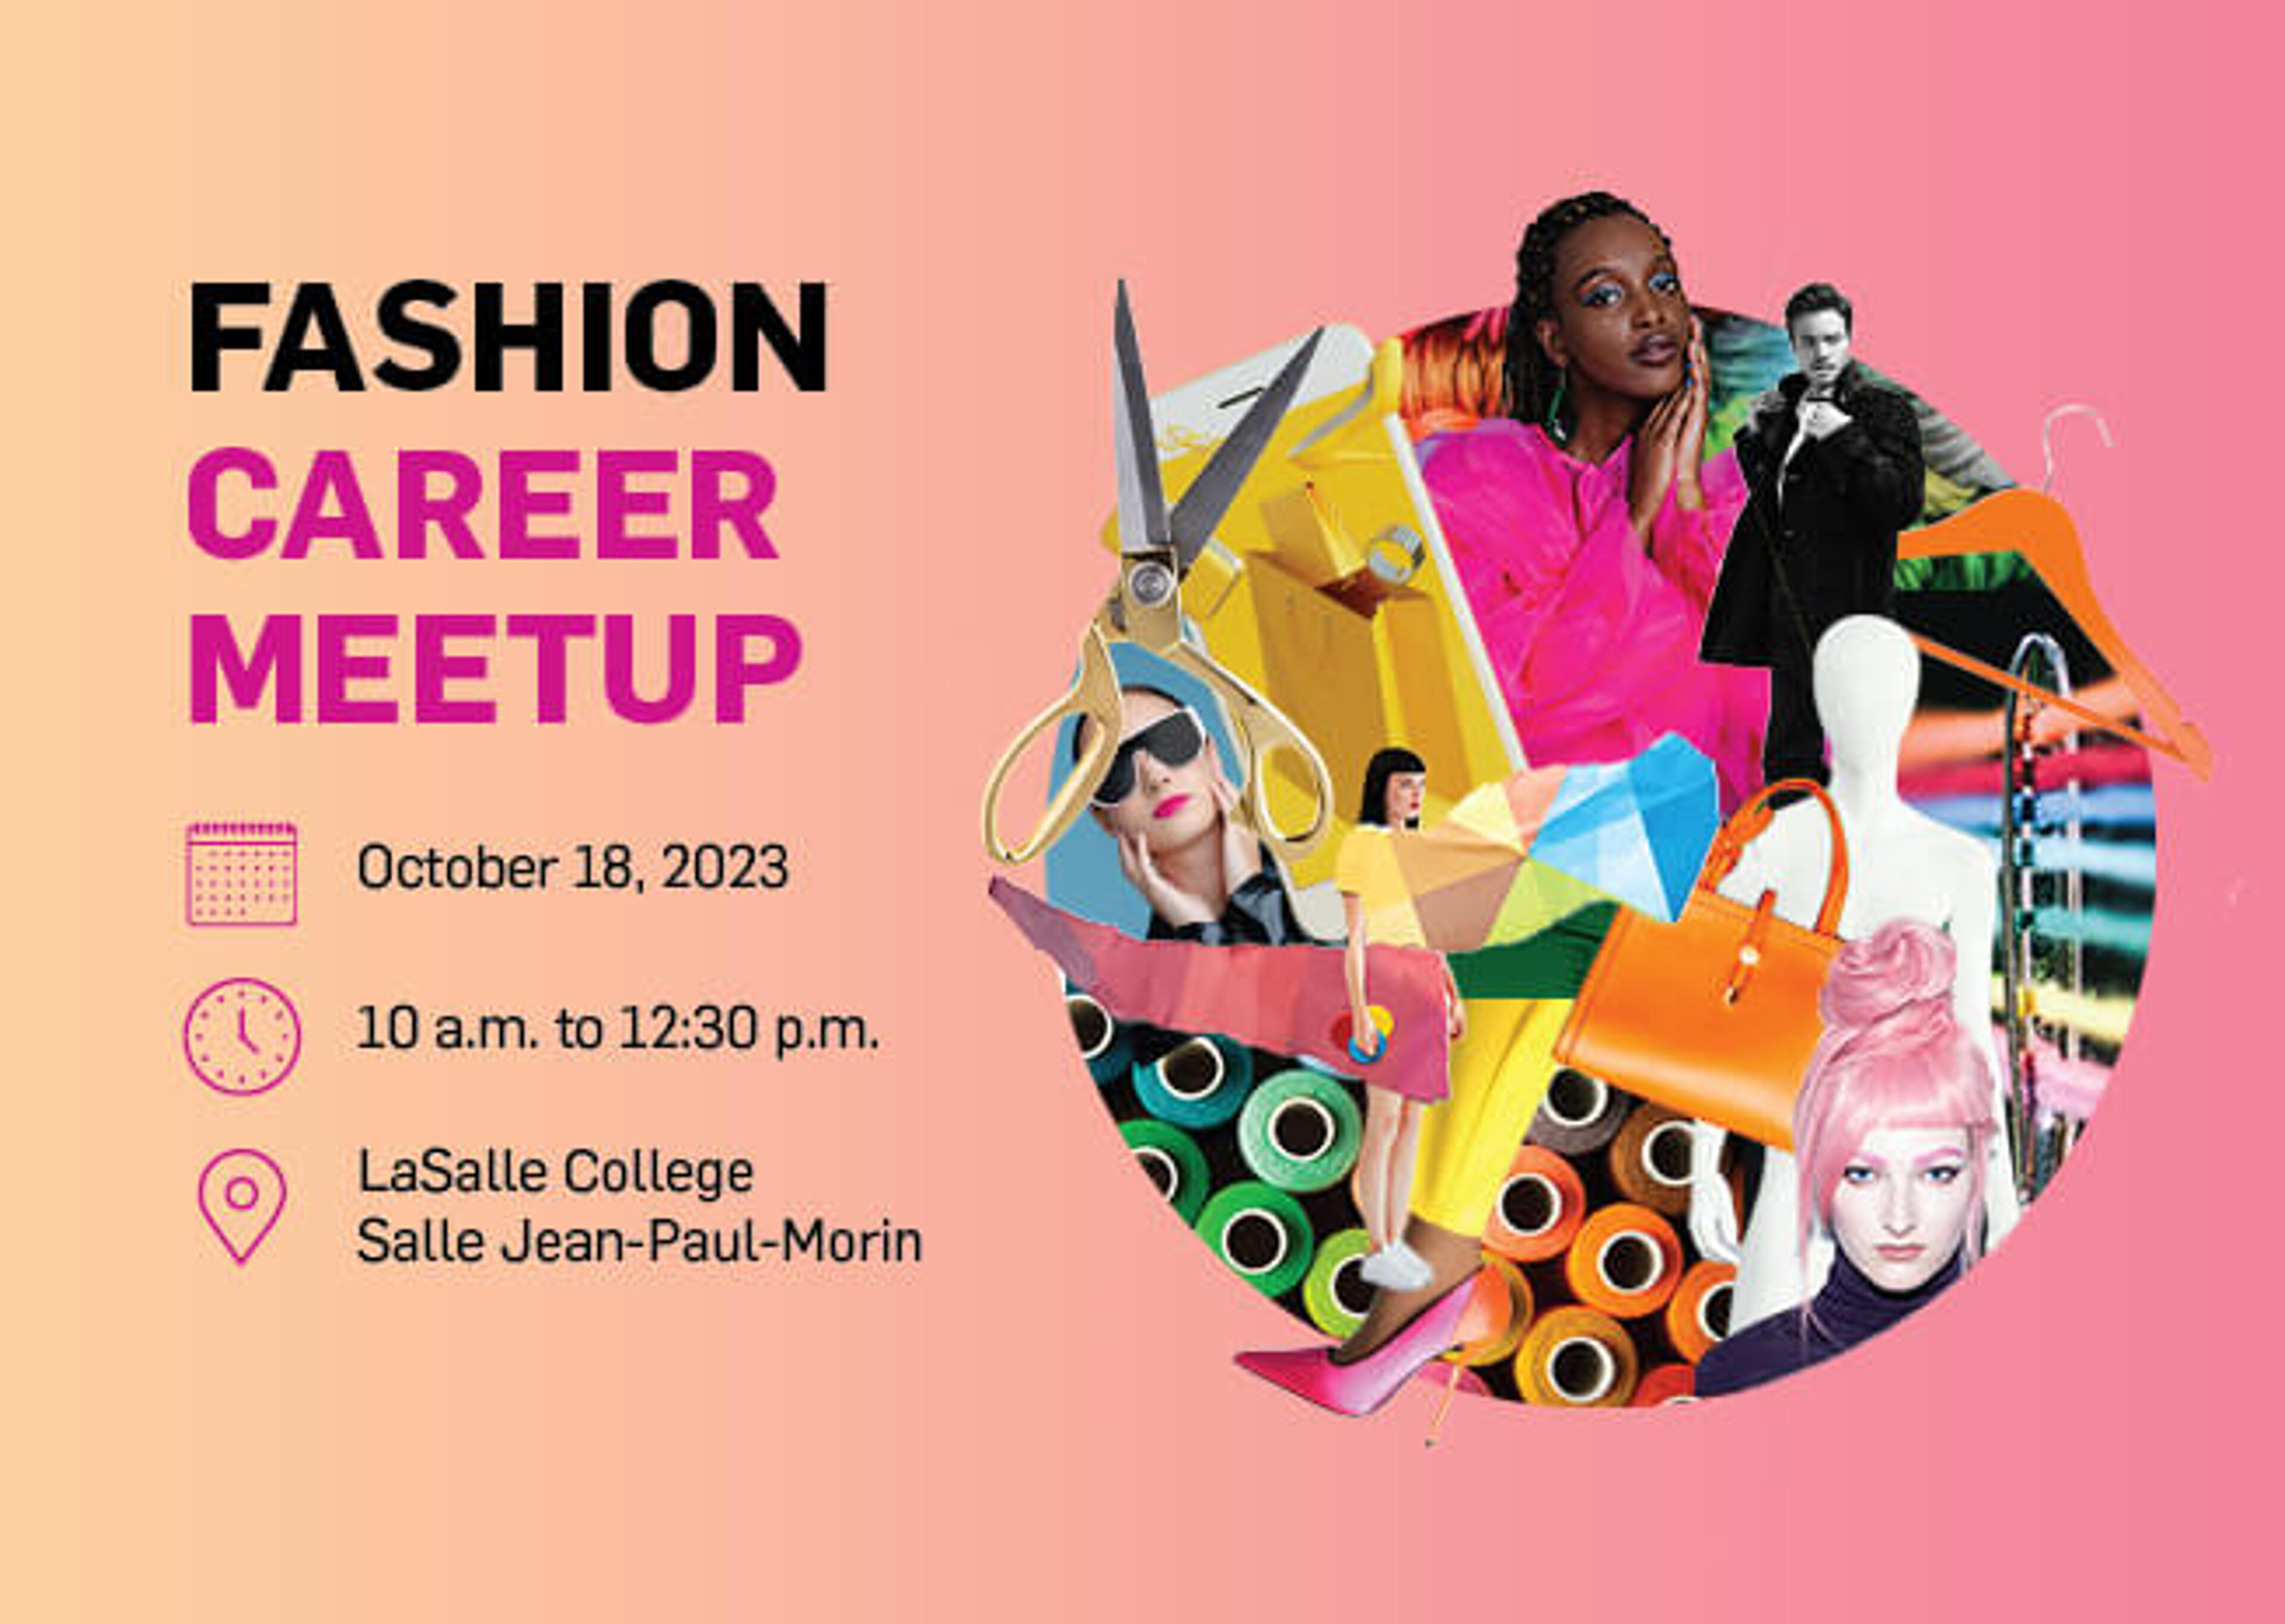 A vibrant announcement for a Fashion Career Meetup on October 18, 2023, at LaSalle College, featuring fashion-related imagery.